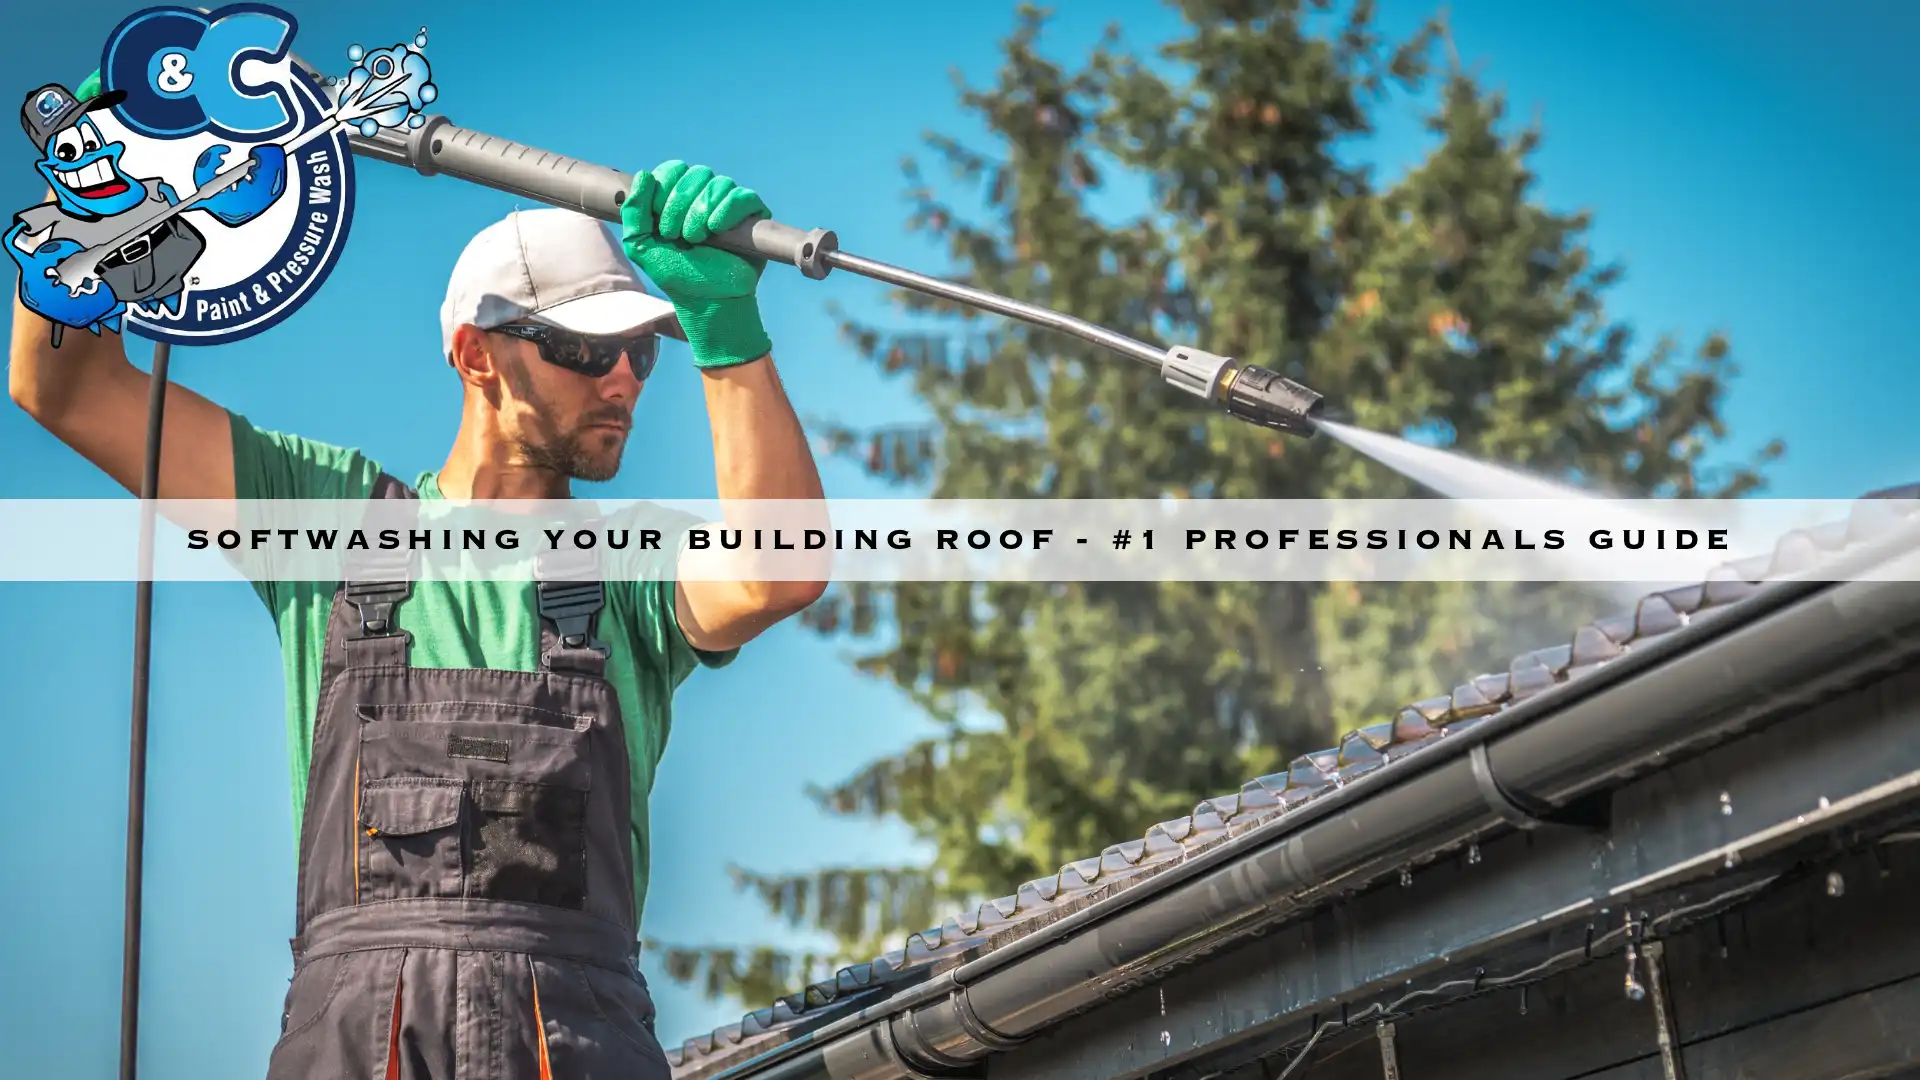 Softwashing Your Building Roof - #1 Professionals Guide